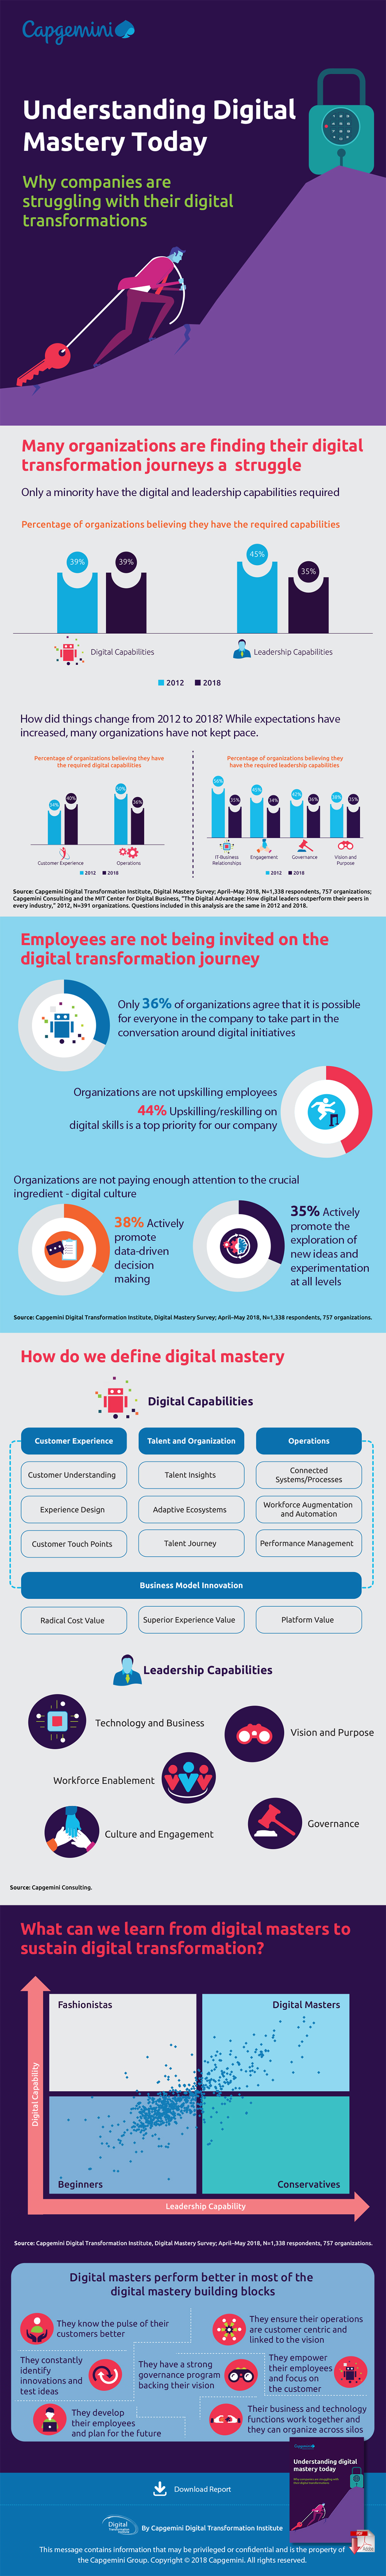 Understanding Digital Mastery Today: Why Companies Are Struggling With Their Digital Transformations